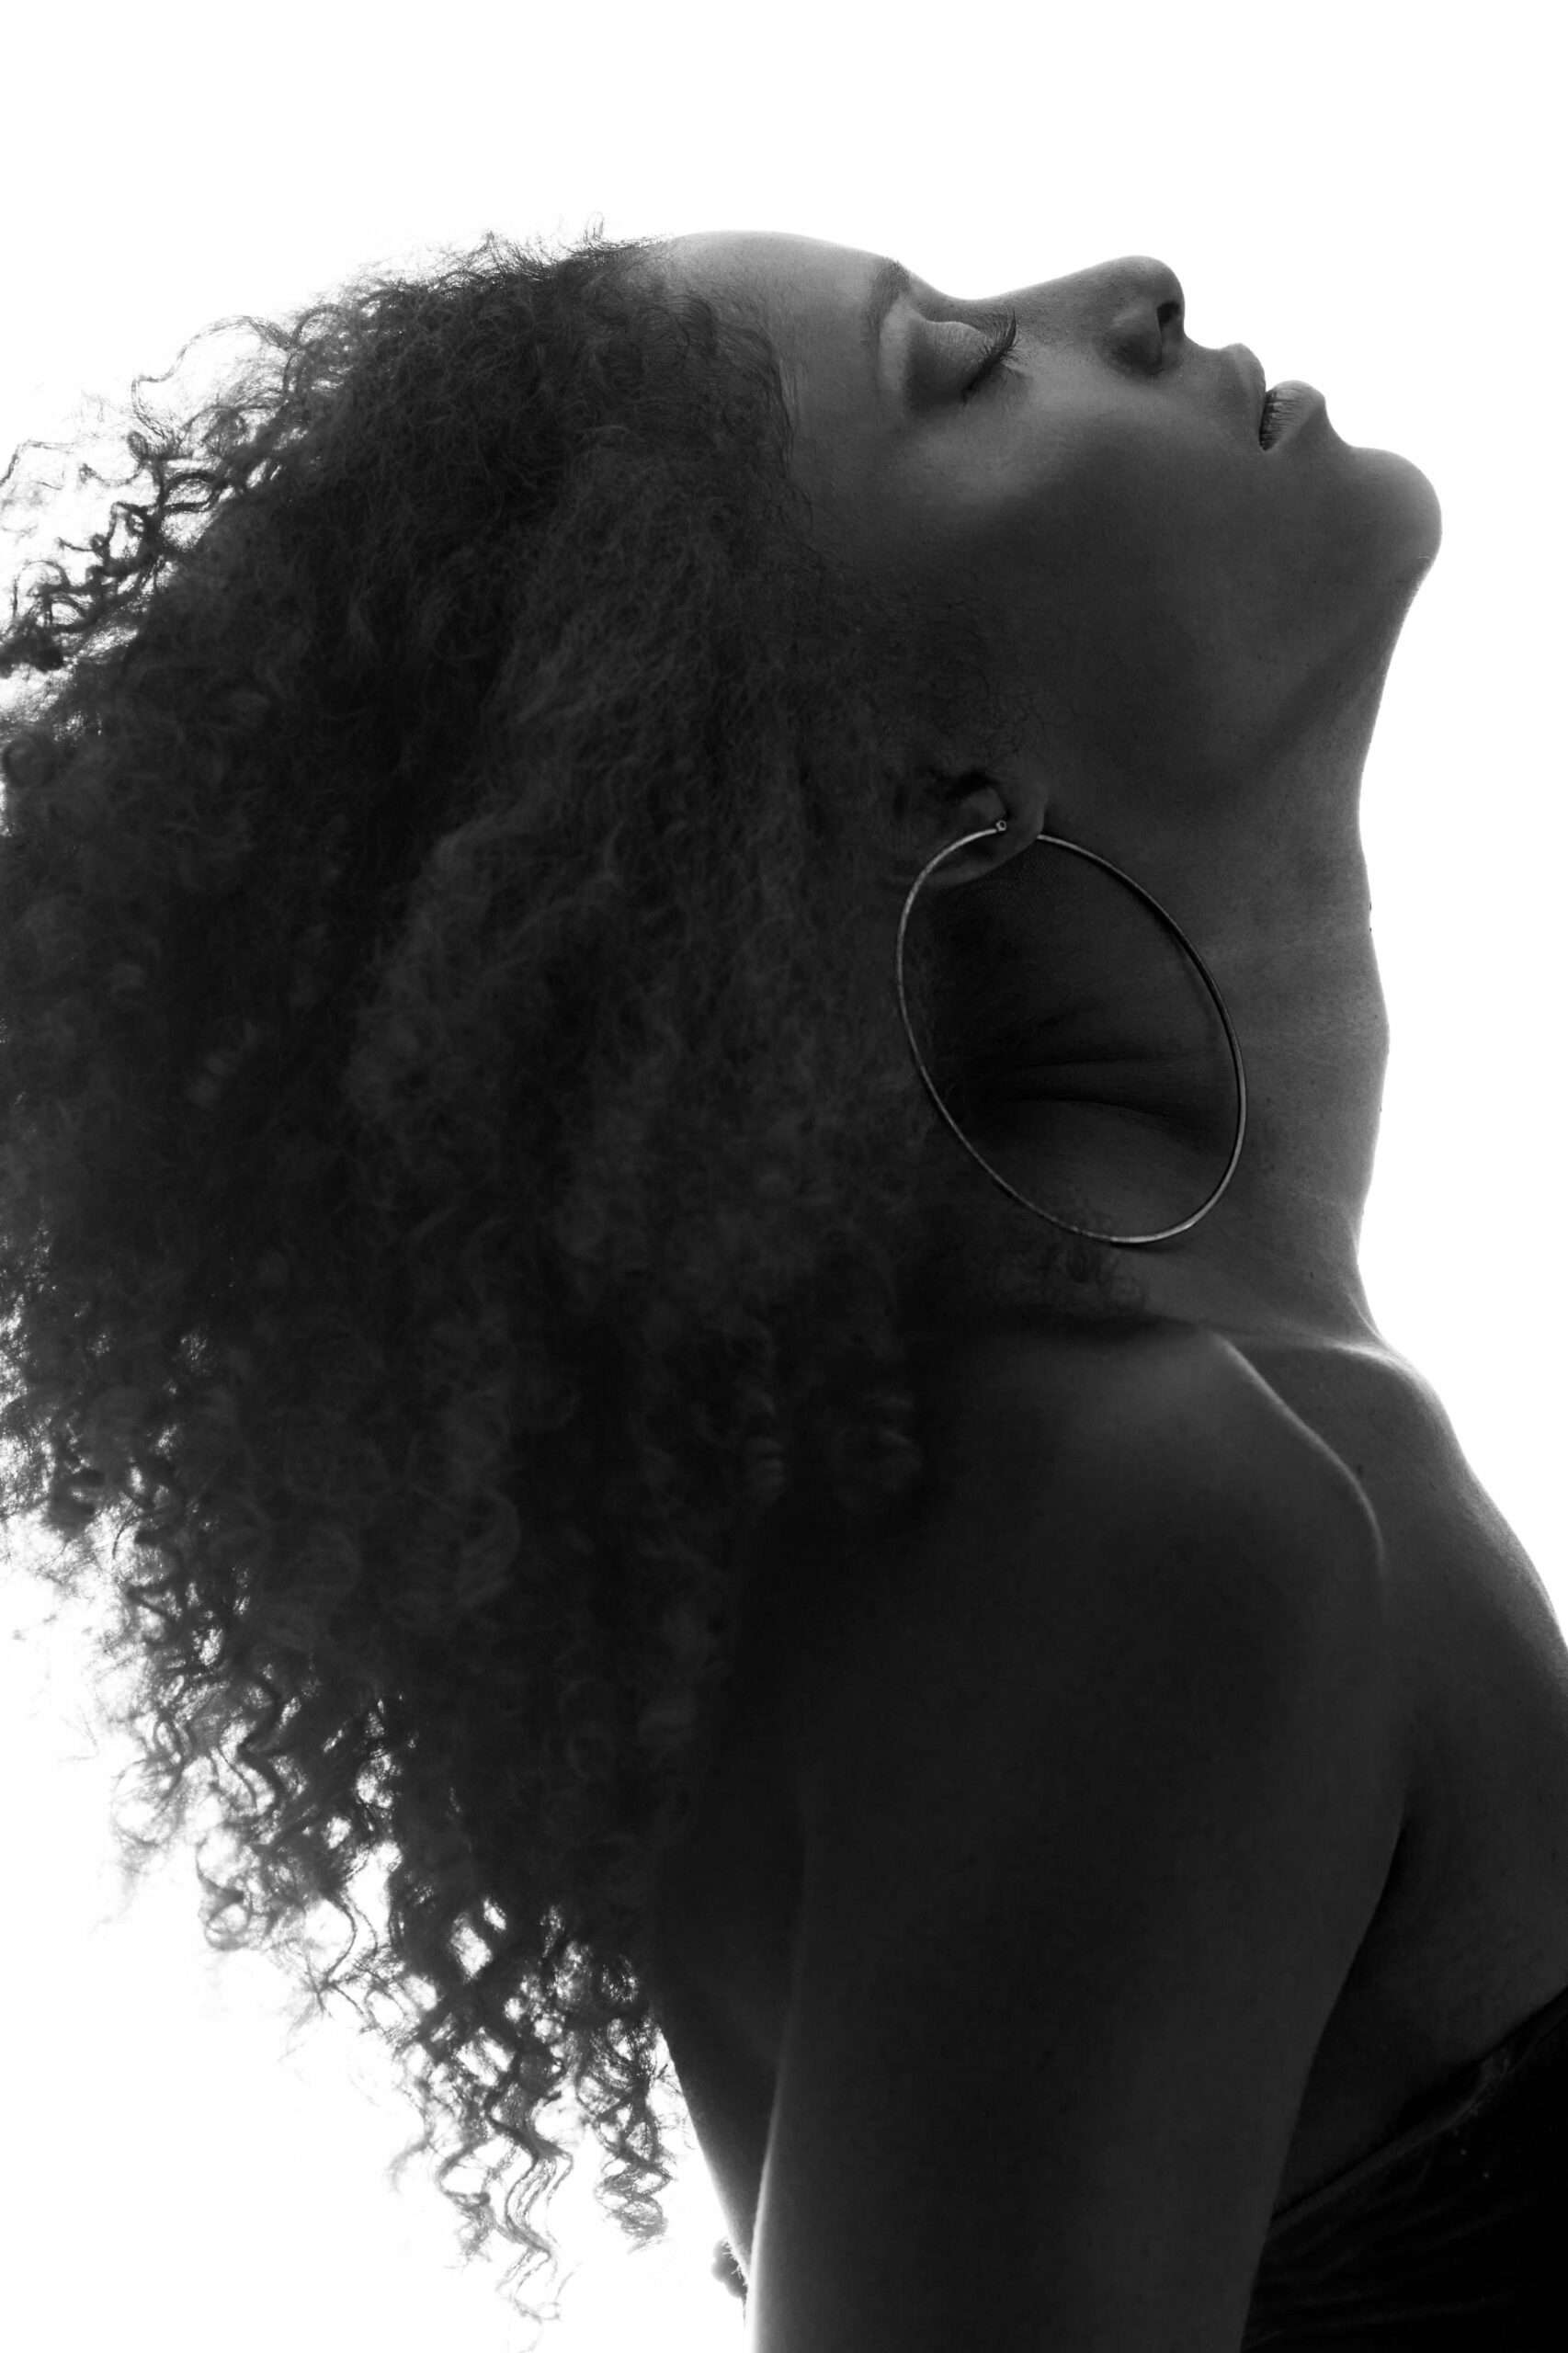 Female Posing With Curly Hair and Hoop Earrings | Prick'd Medspa in St. Louis, MO